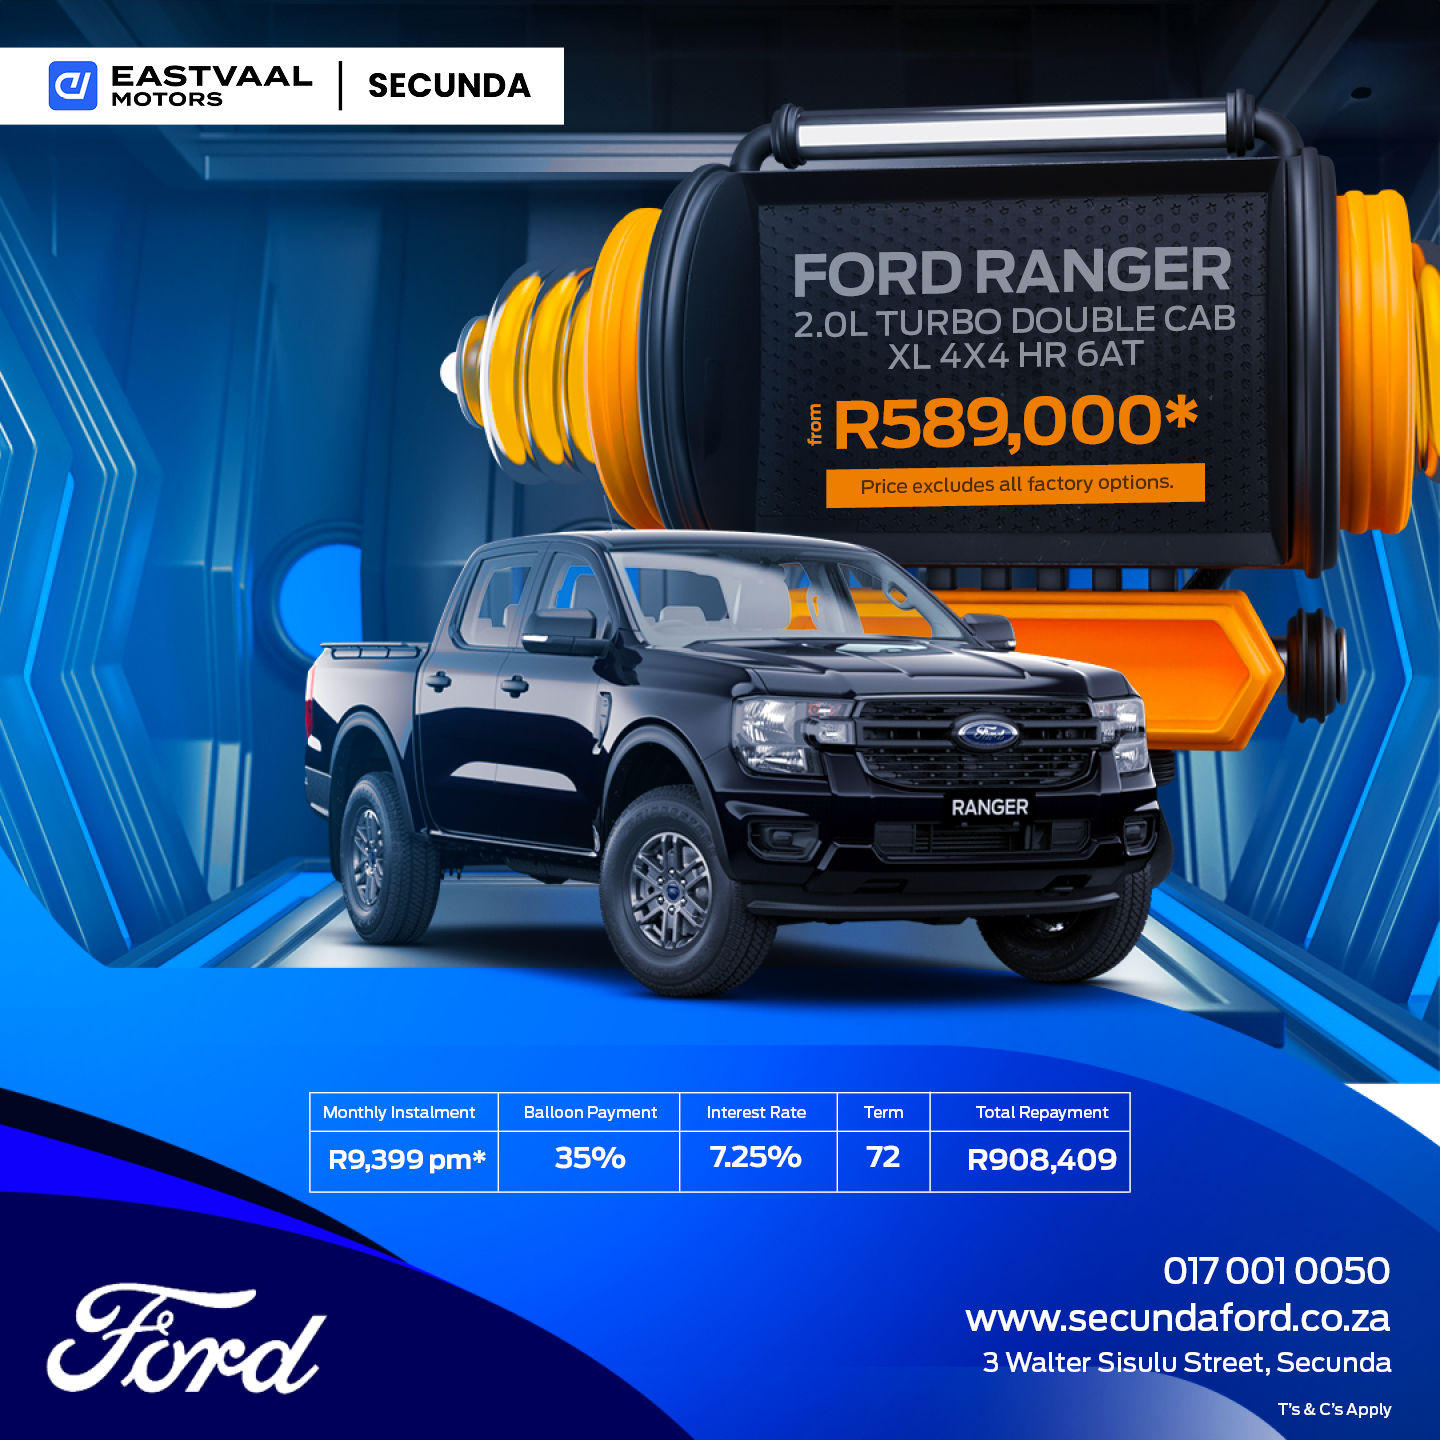 Truck month is here! Ford Ranger 2.0L Turbo D/B XL 4×4 HR 6AT image from 